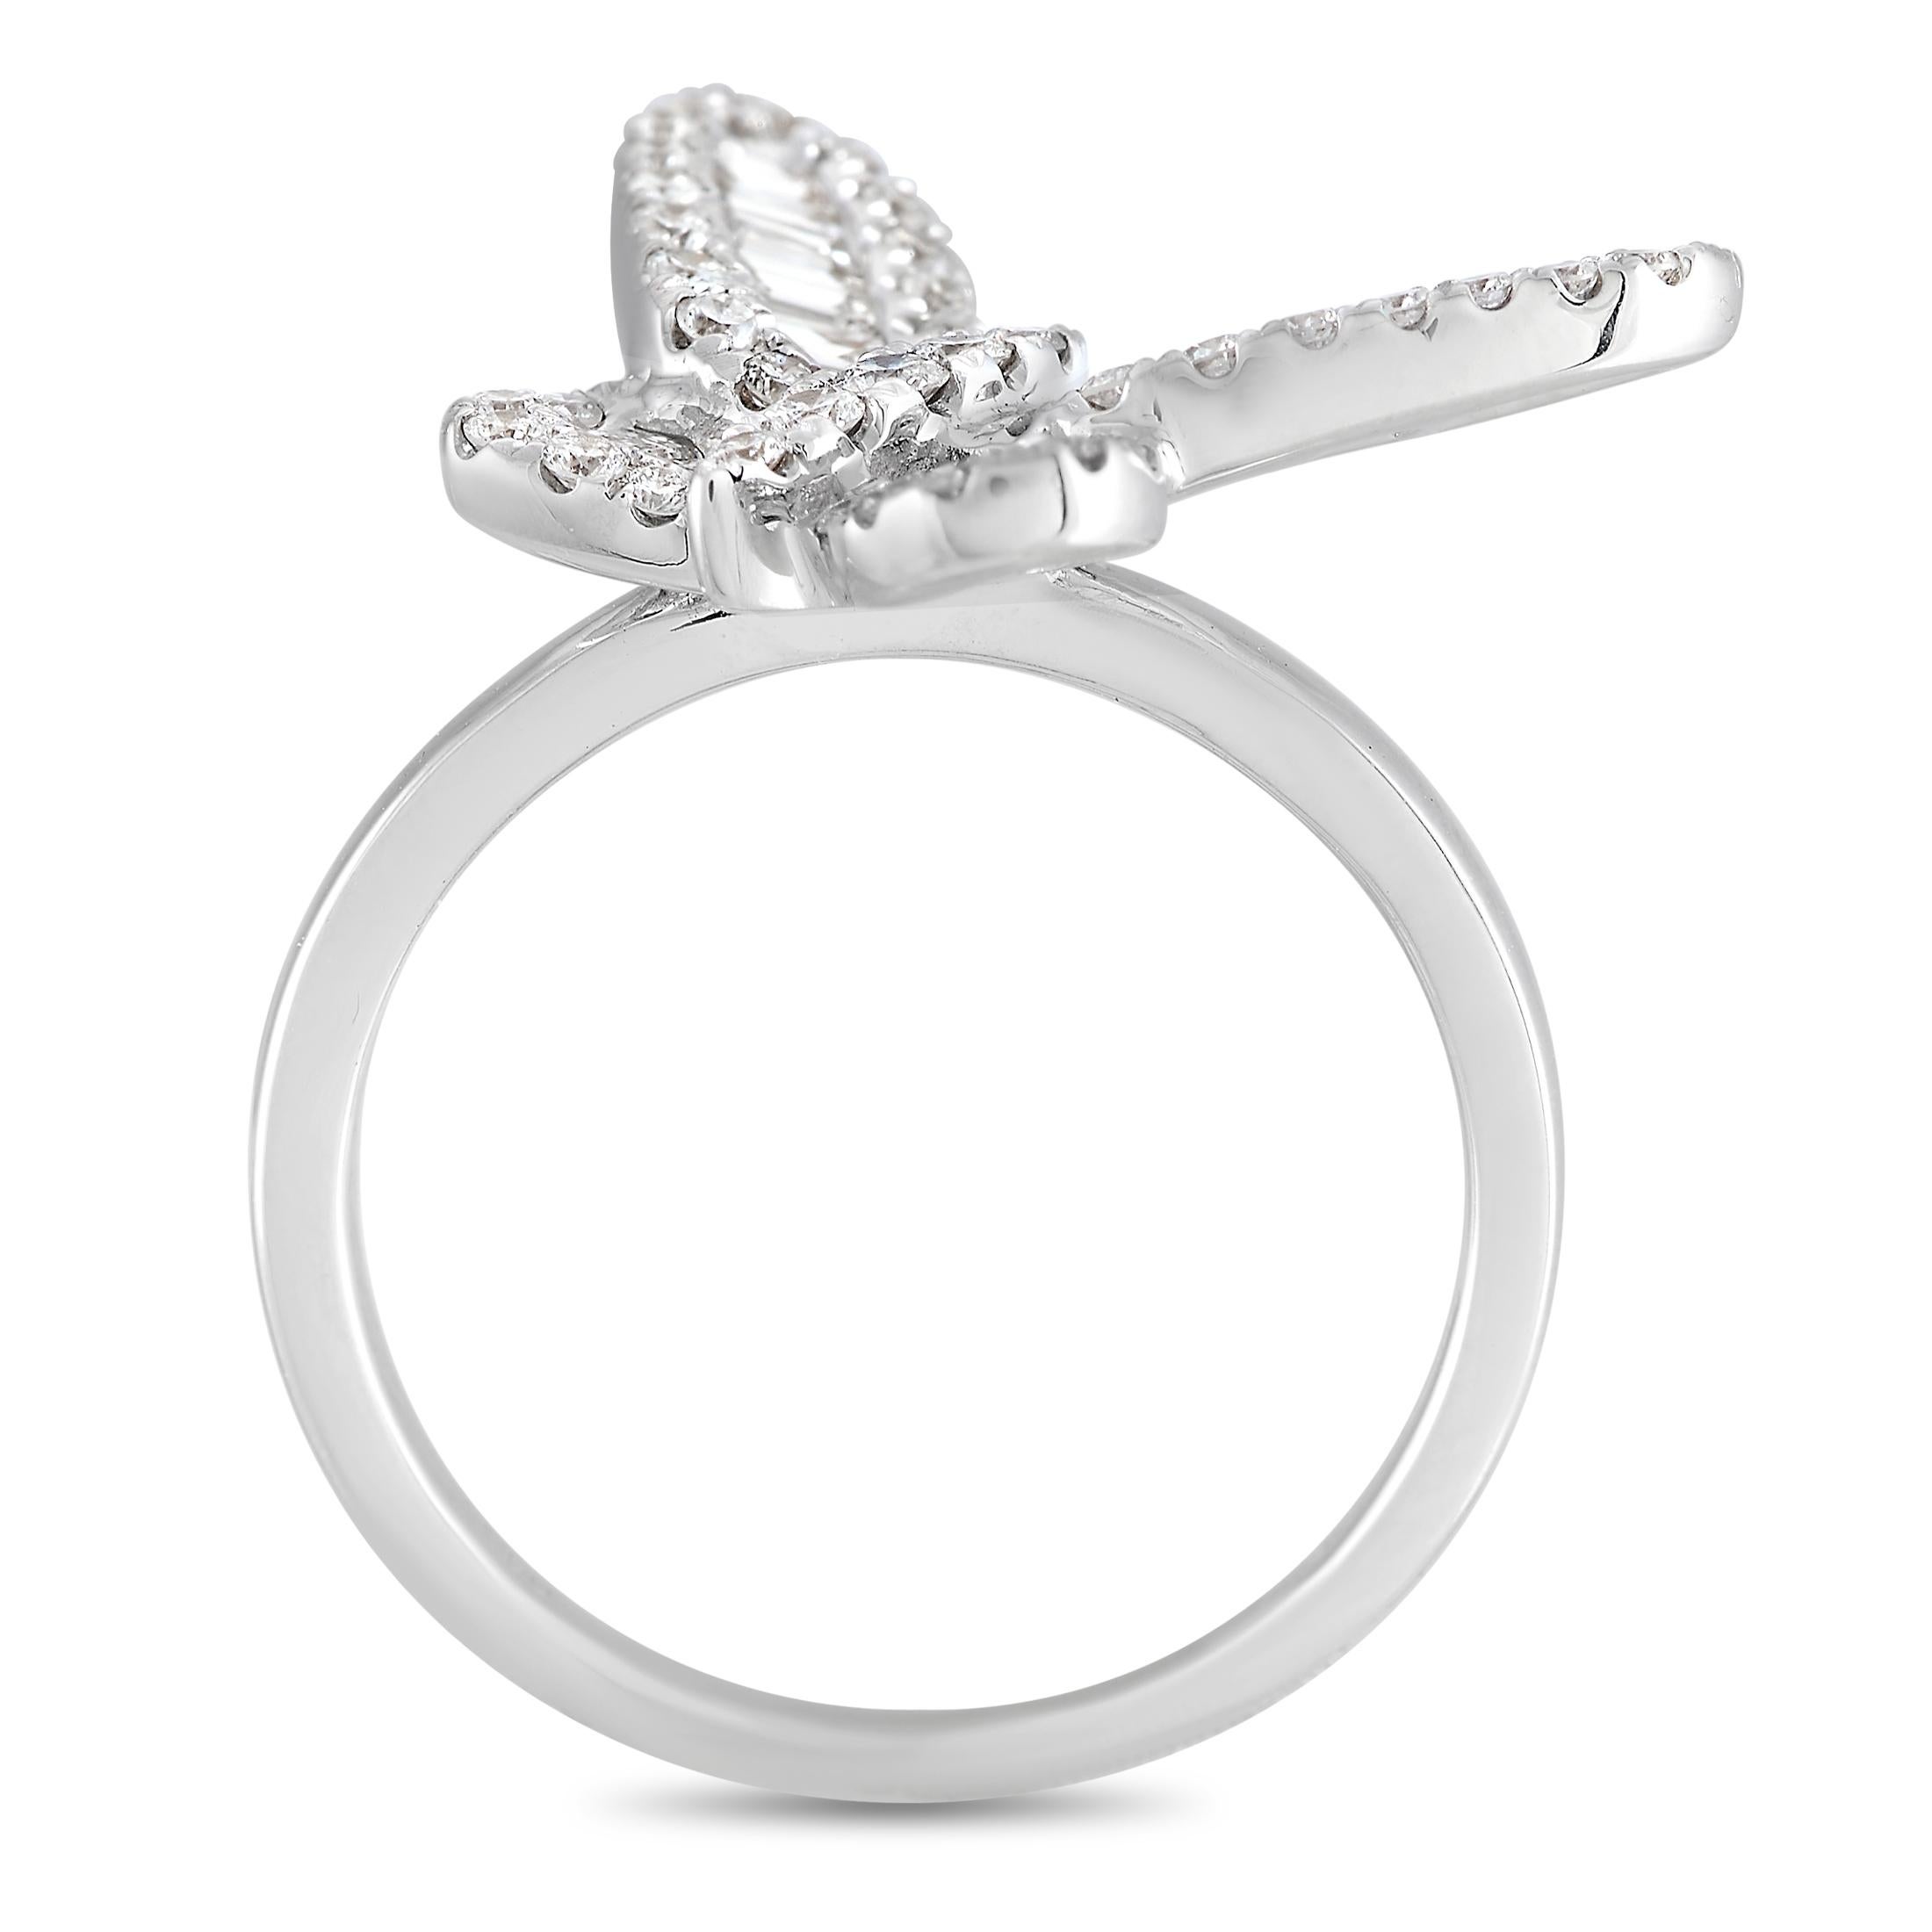 This charming ring is both luxurious and whimsical. Perched atop a 2mm wide band, you’ll find a 18K White Gold butterfly. It’s accented by an array of sparkling diamonds, including 0.58 carats of diamond baguettes and round cut diamonds totaling